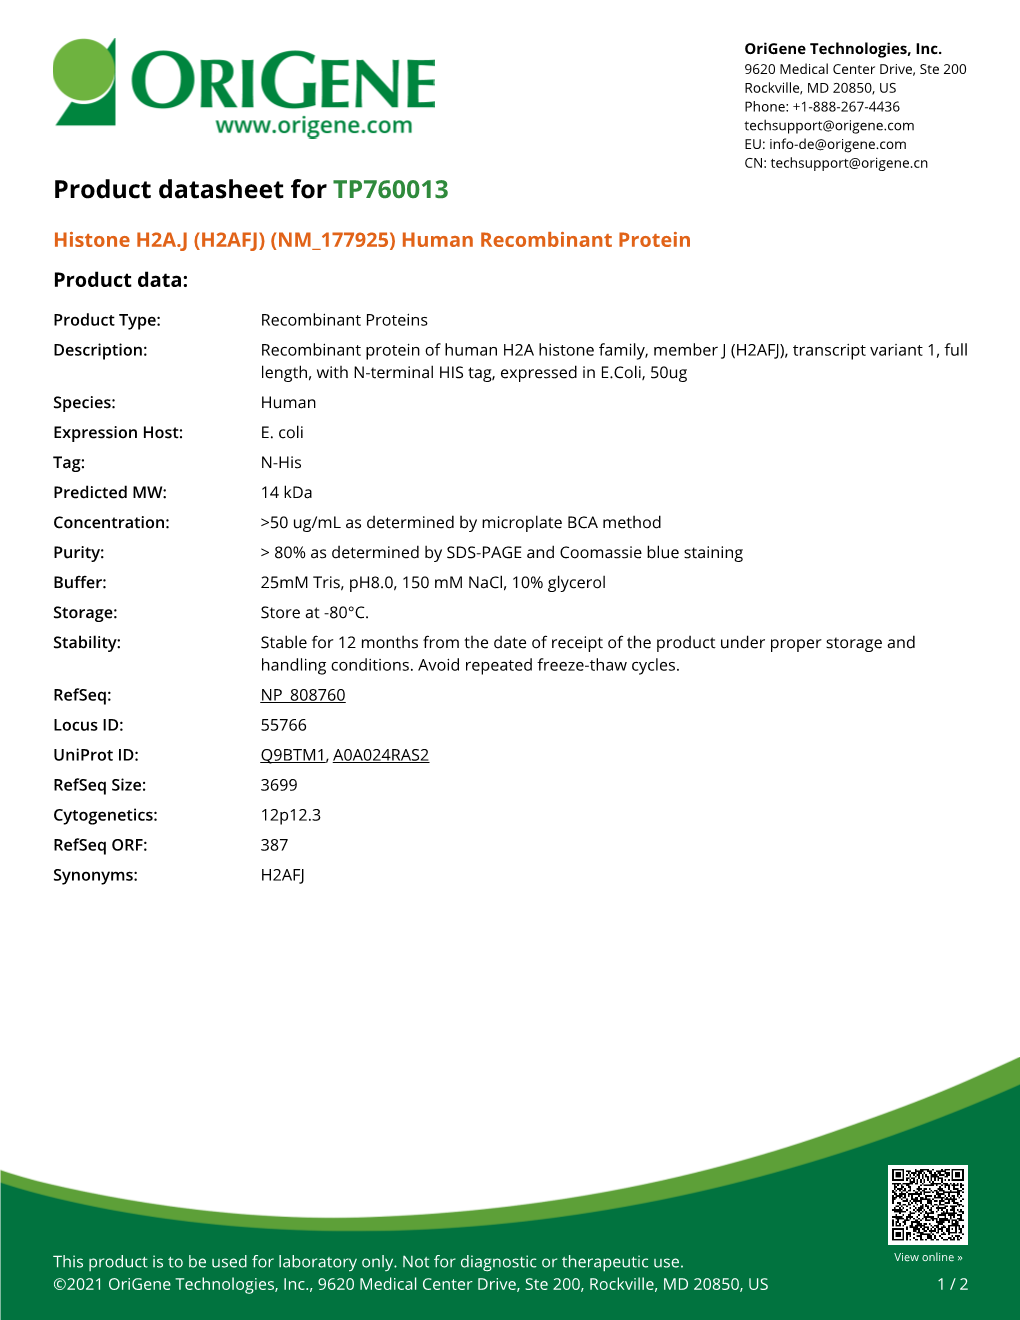 Histone H2A.J (H2AFJ) (NM 177925) Human Recombinant Protein Product Data